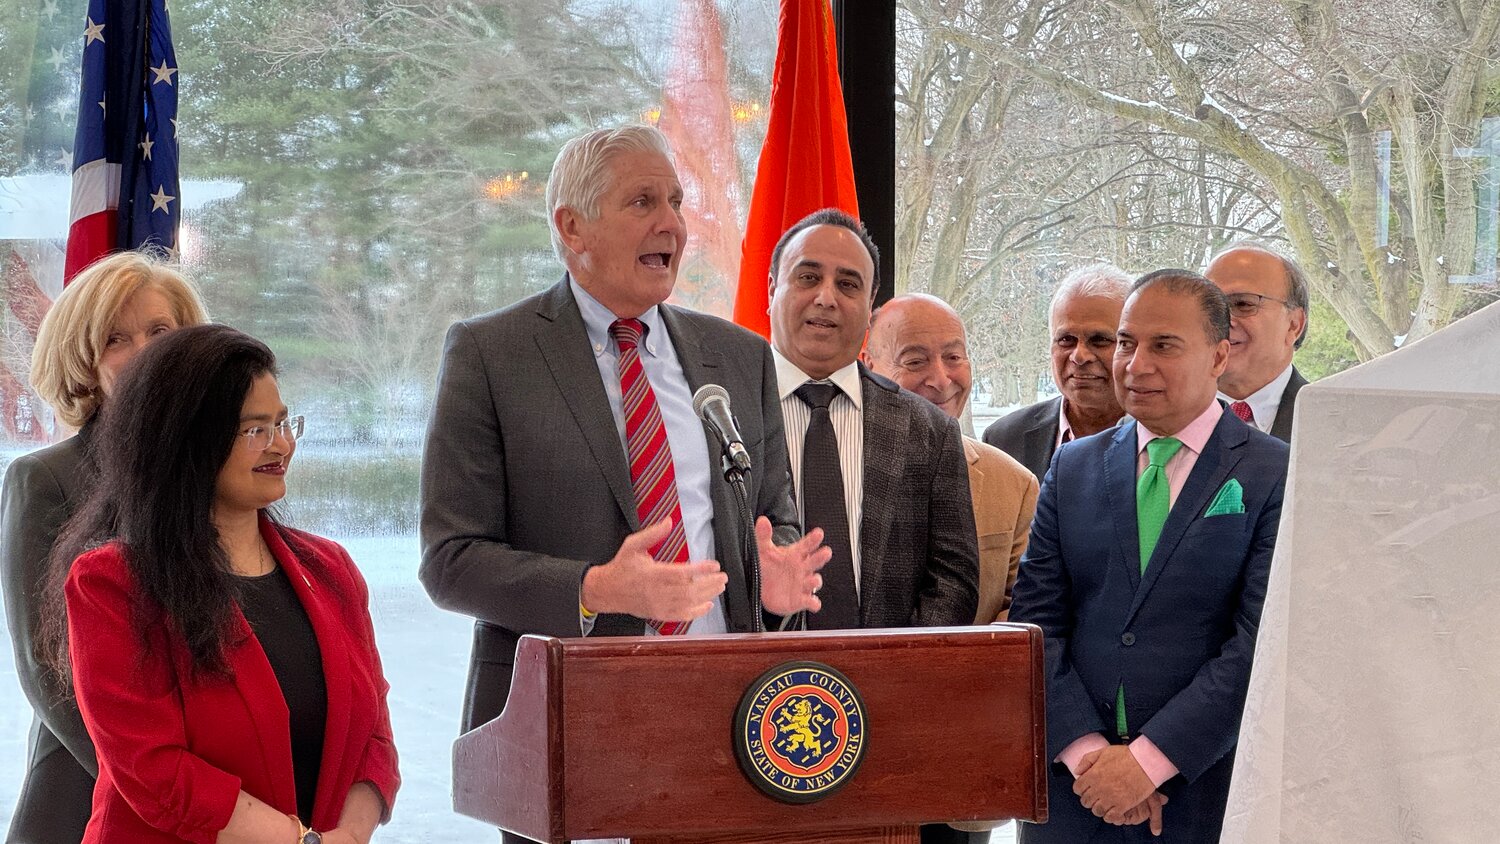 Nassau County Executive Bruce Blakeman revealed more details about the cricket tournament scheduled to take place in Eisenhower Park. The T20 Cricket World Cup is expected to draw tens of thousands of fans when it comes to the county beginning June 3.